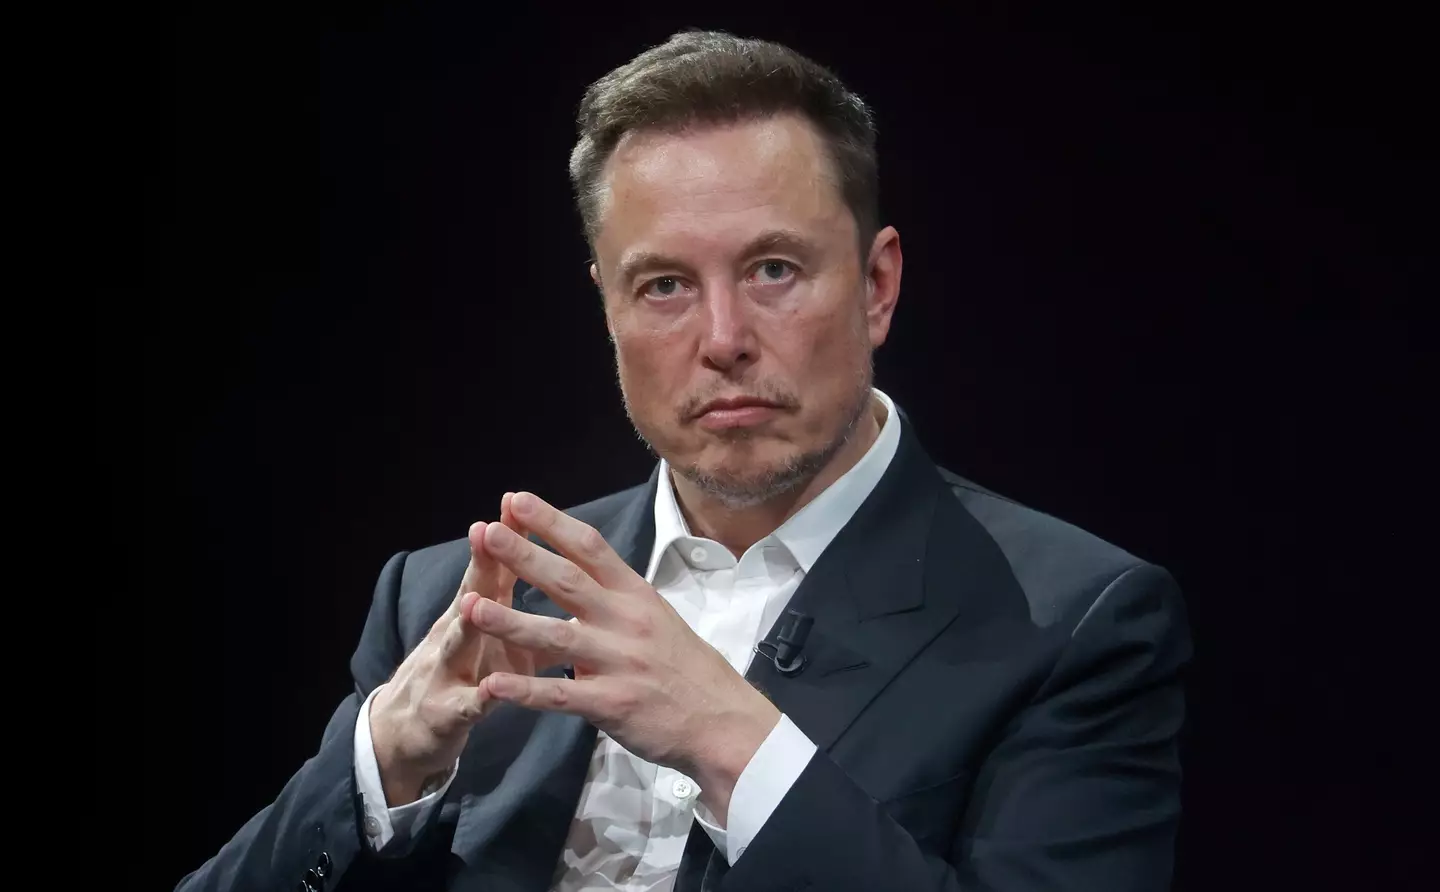 Elon Musk has reacted to the hilarious AI images.